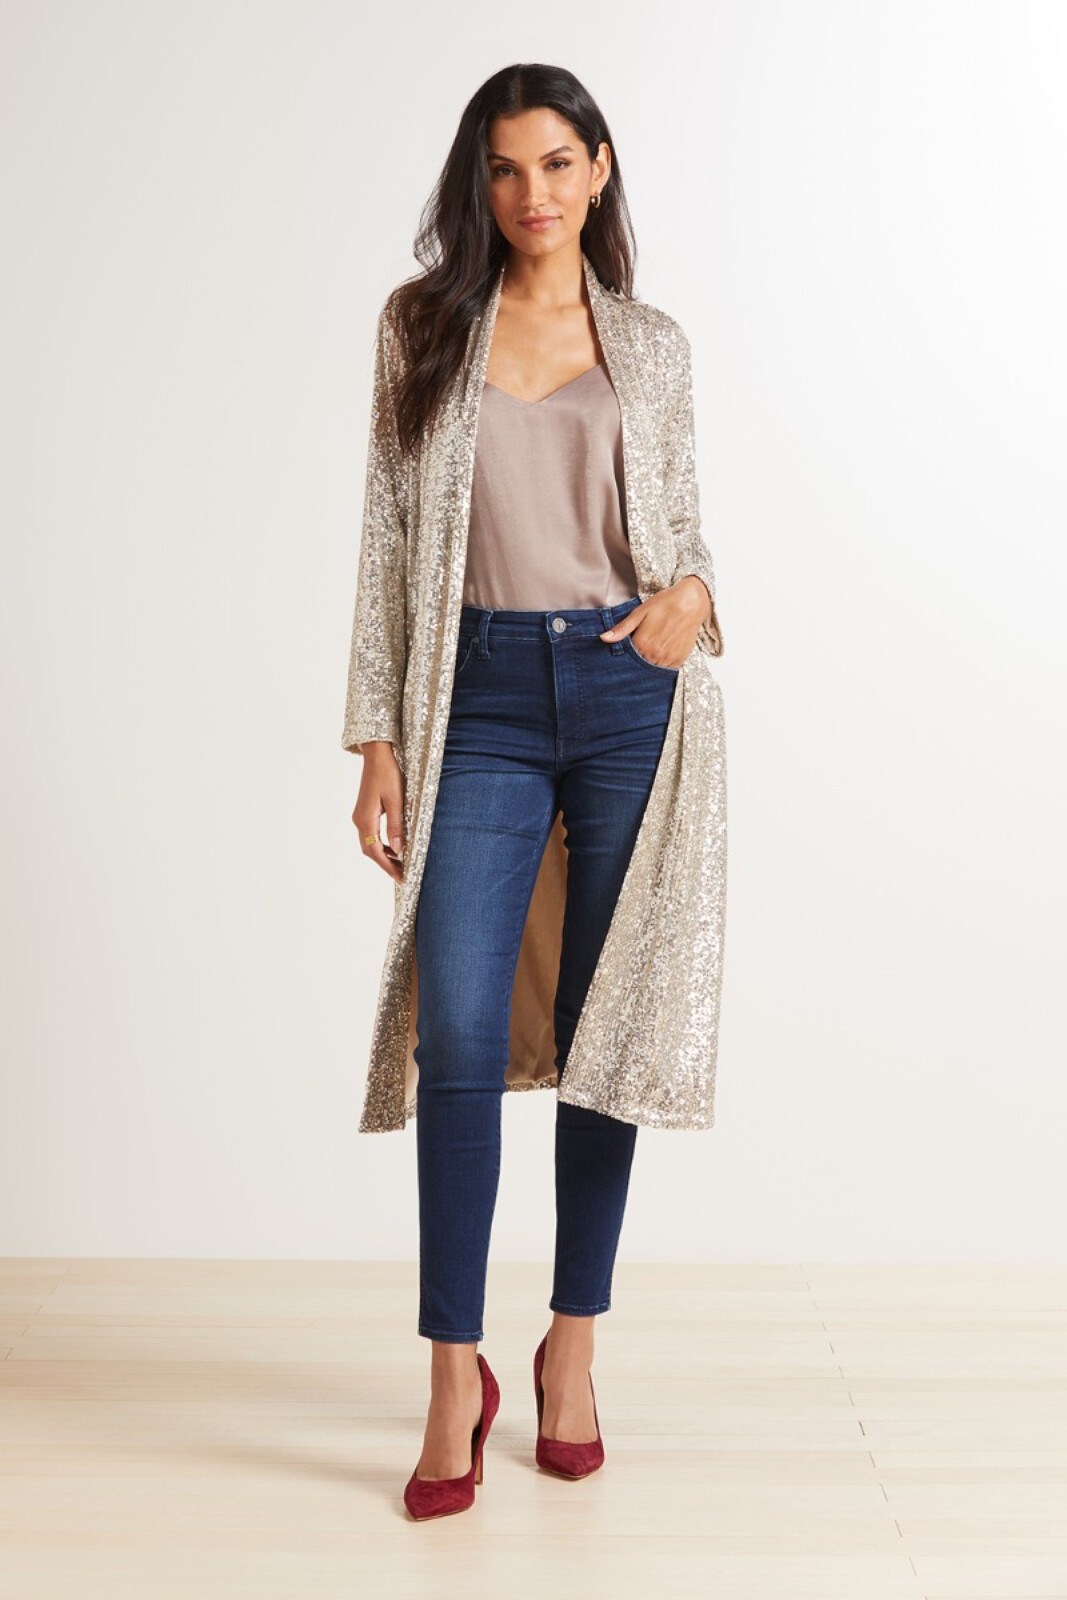 Sequin duster 3 ways. My favorite duster jacket for the holidays